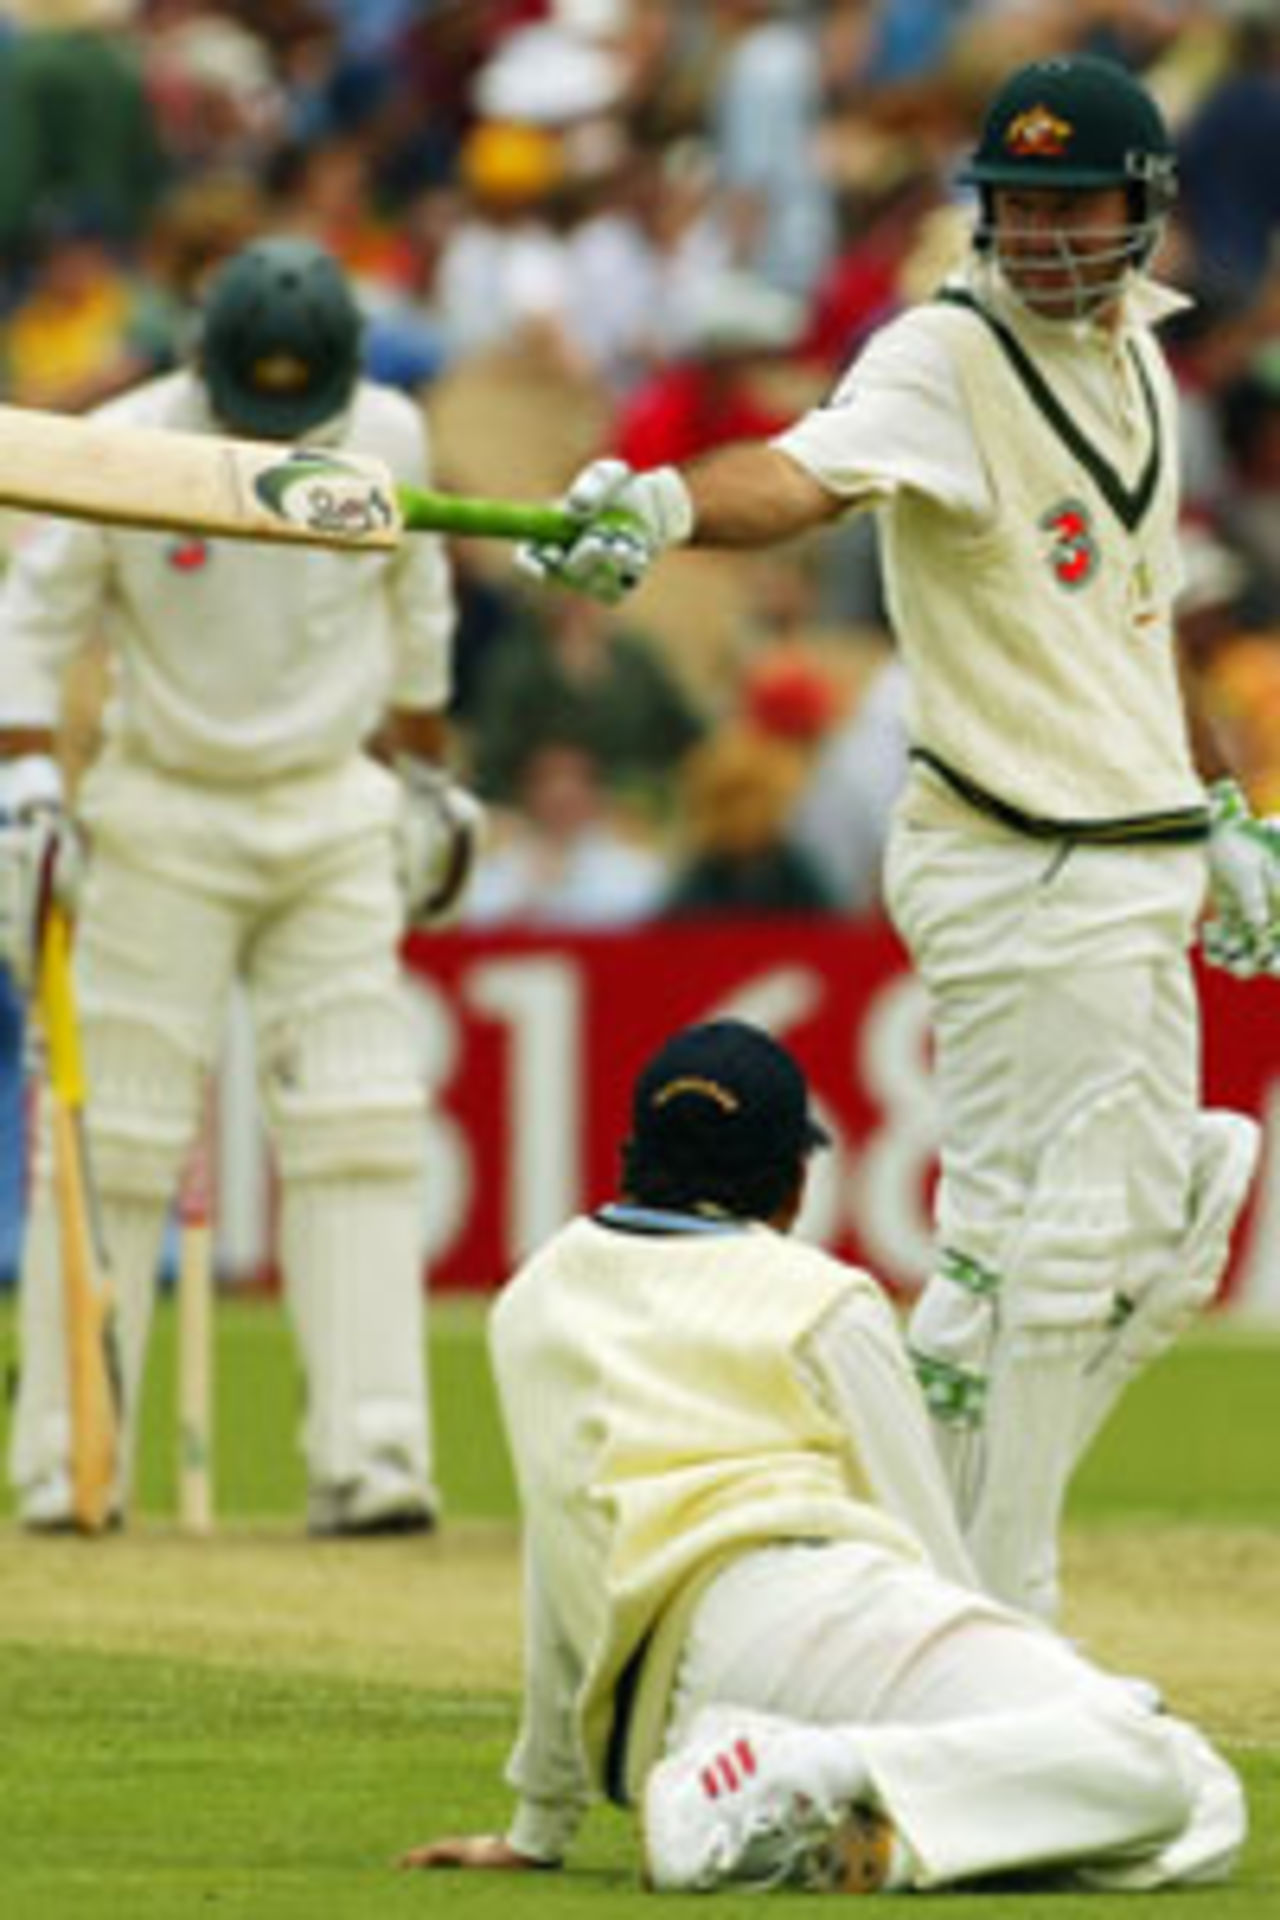 Ricky Ponting of Australia shares a joke with Sachin Tendulkar of India during the 2nd Test between Australia and India at the Adelaide Oval on December 12, 2003 in Adelaide, Australia.